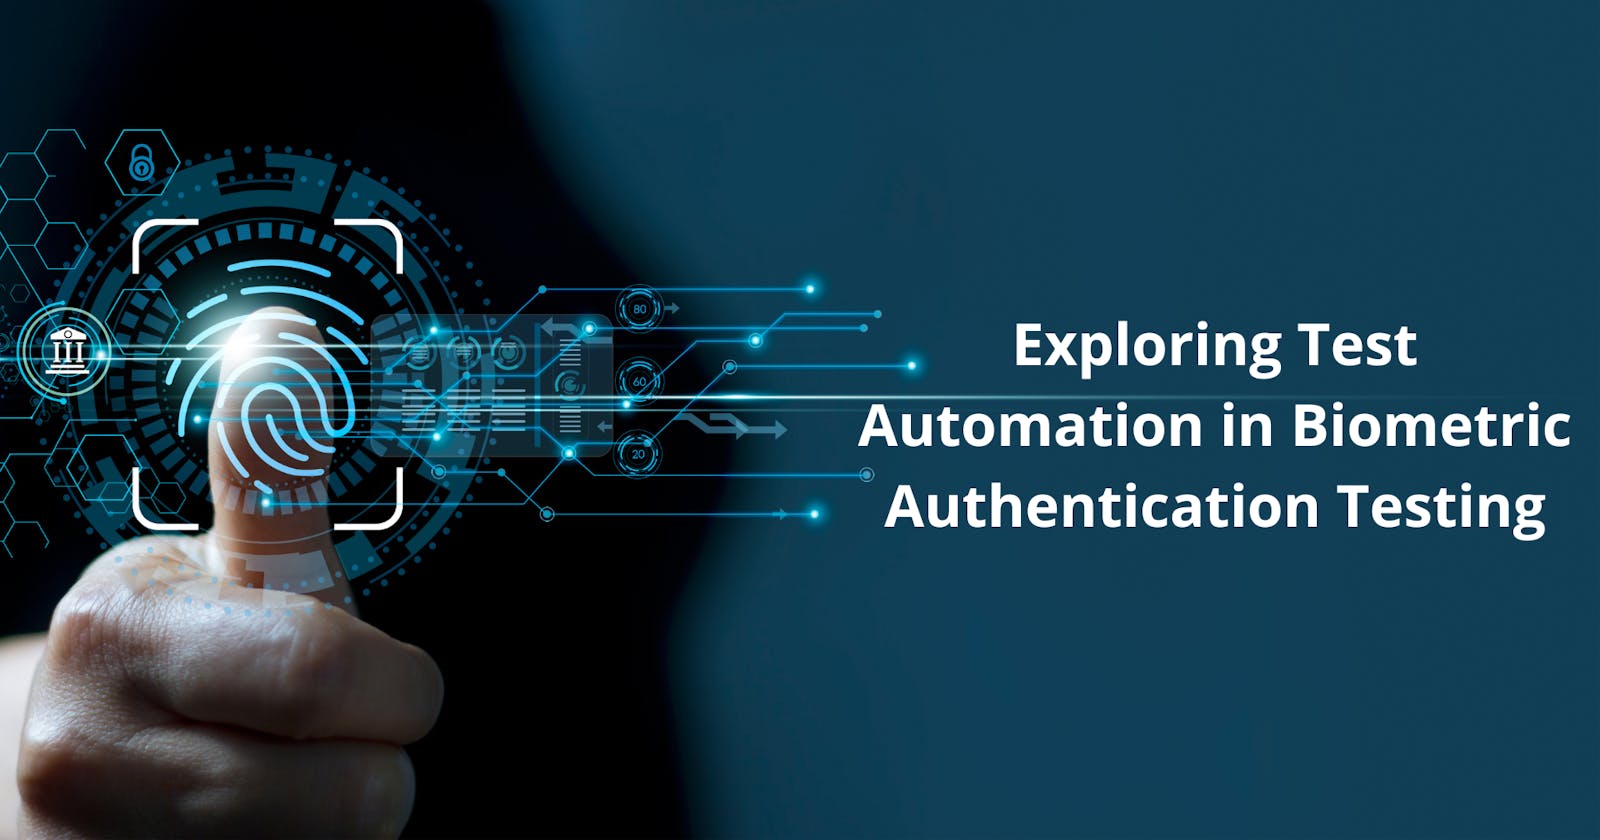 Exploring Test Automation in Biometric Authentication Testing